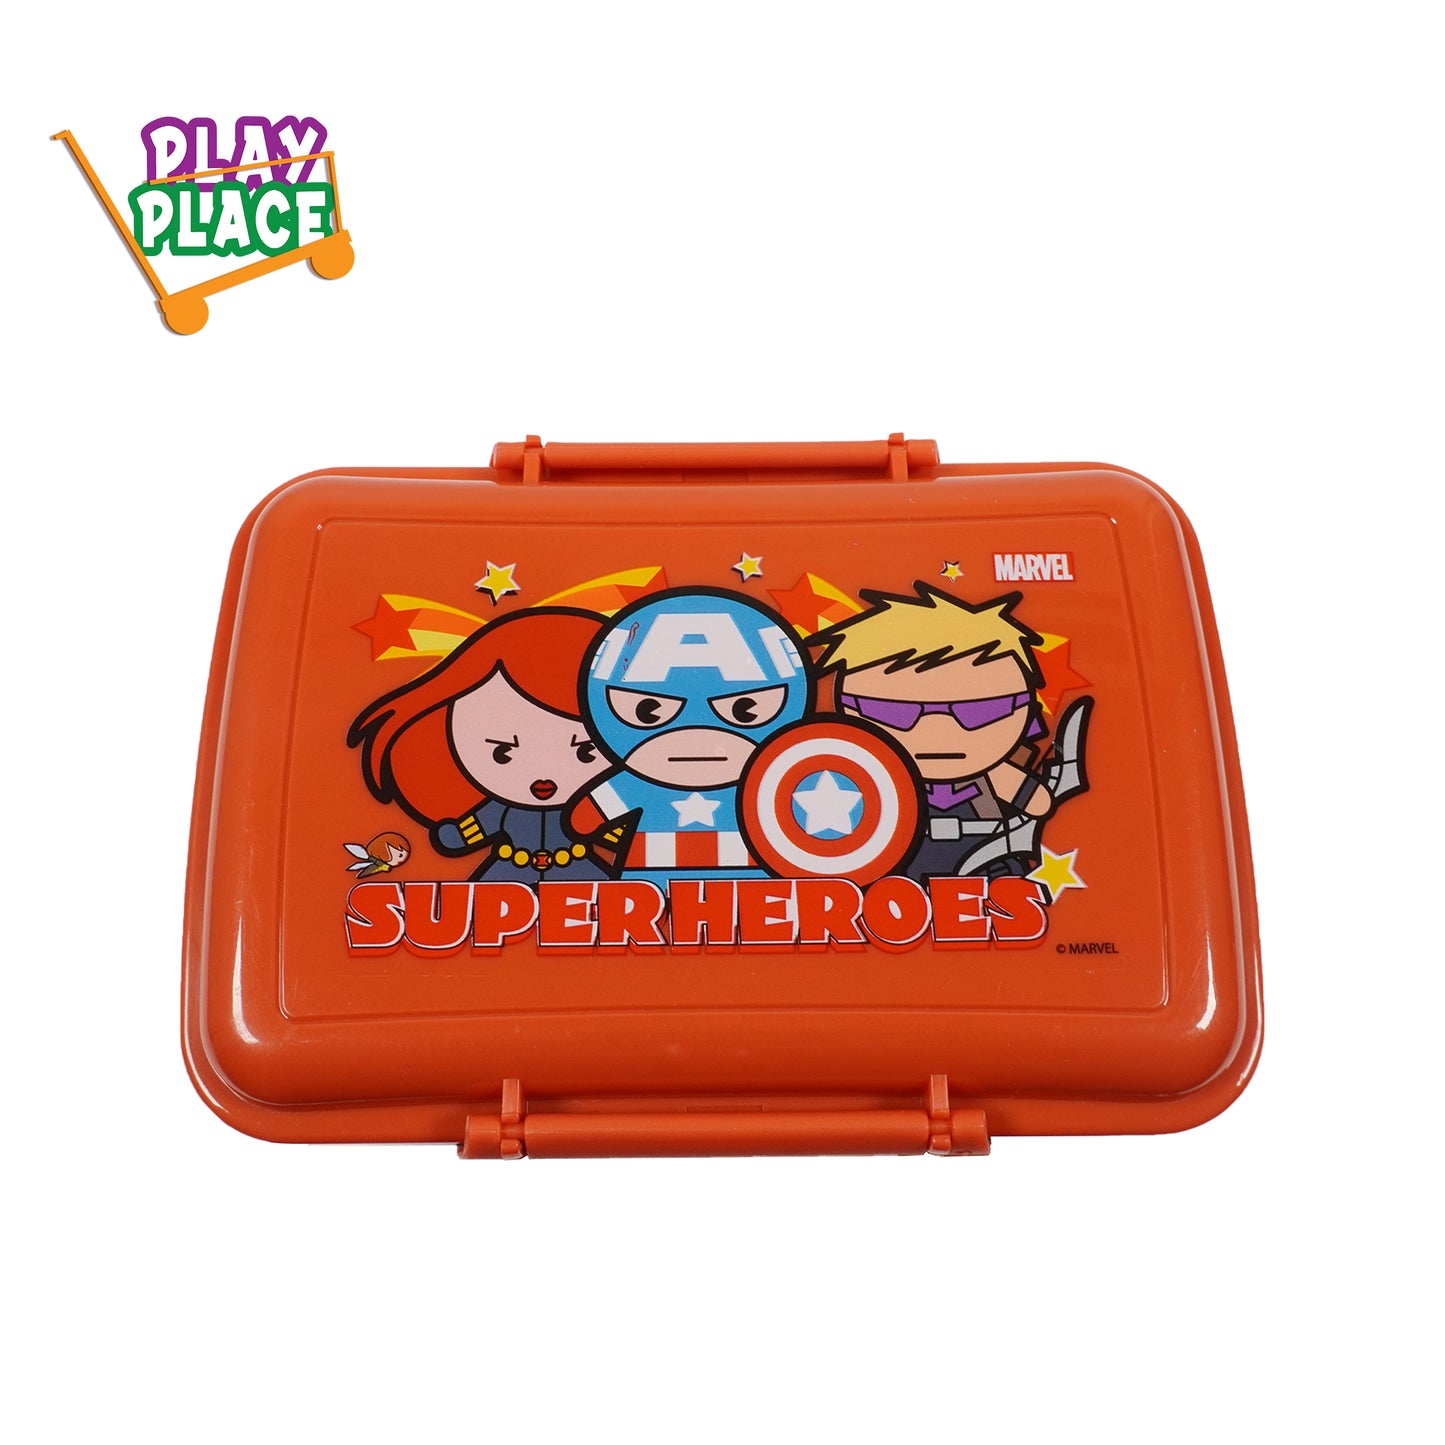 MGM Super Heroes Lunch Box